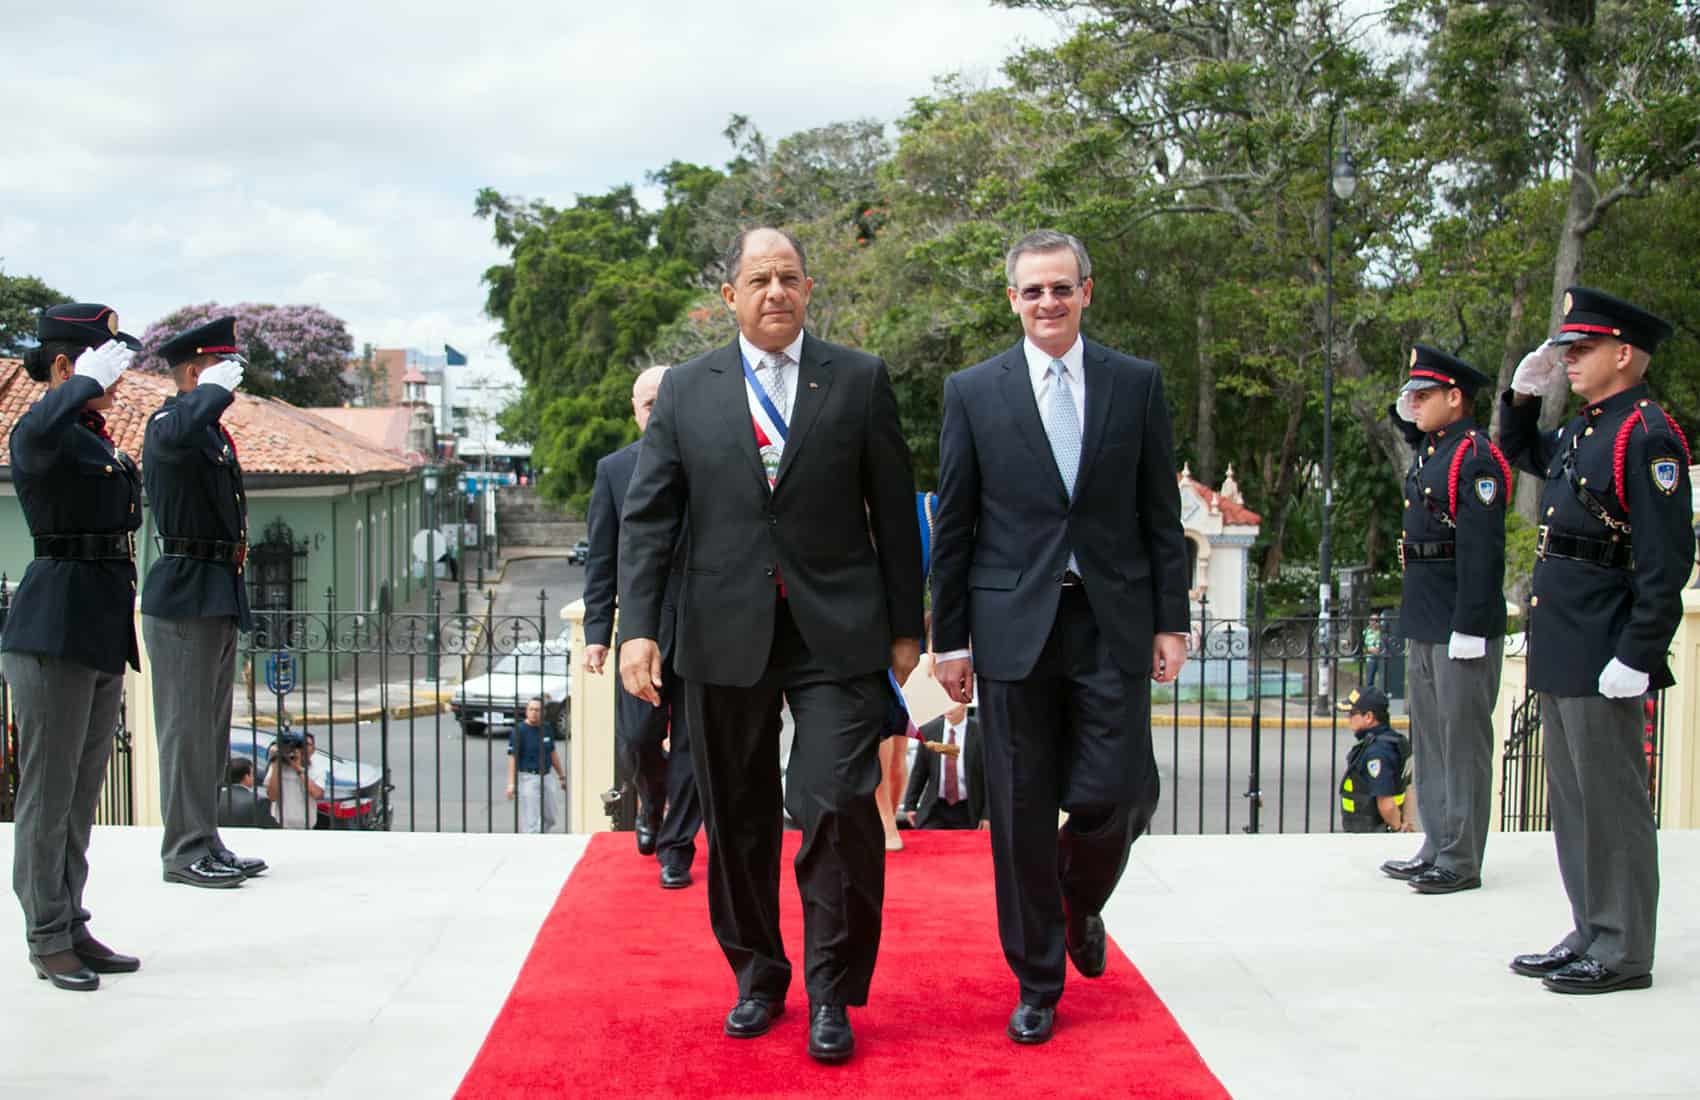 Solís trip to Cuba: President Luis Guillermo Solís and Foreign Minister Manuel González